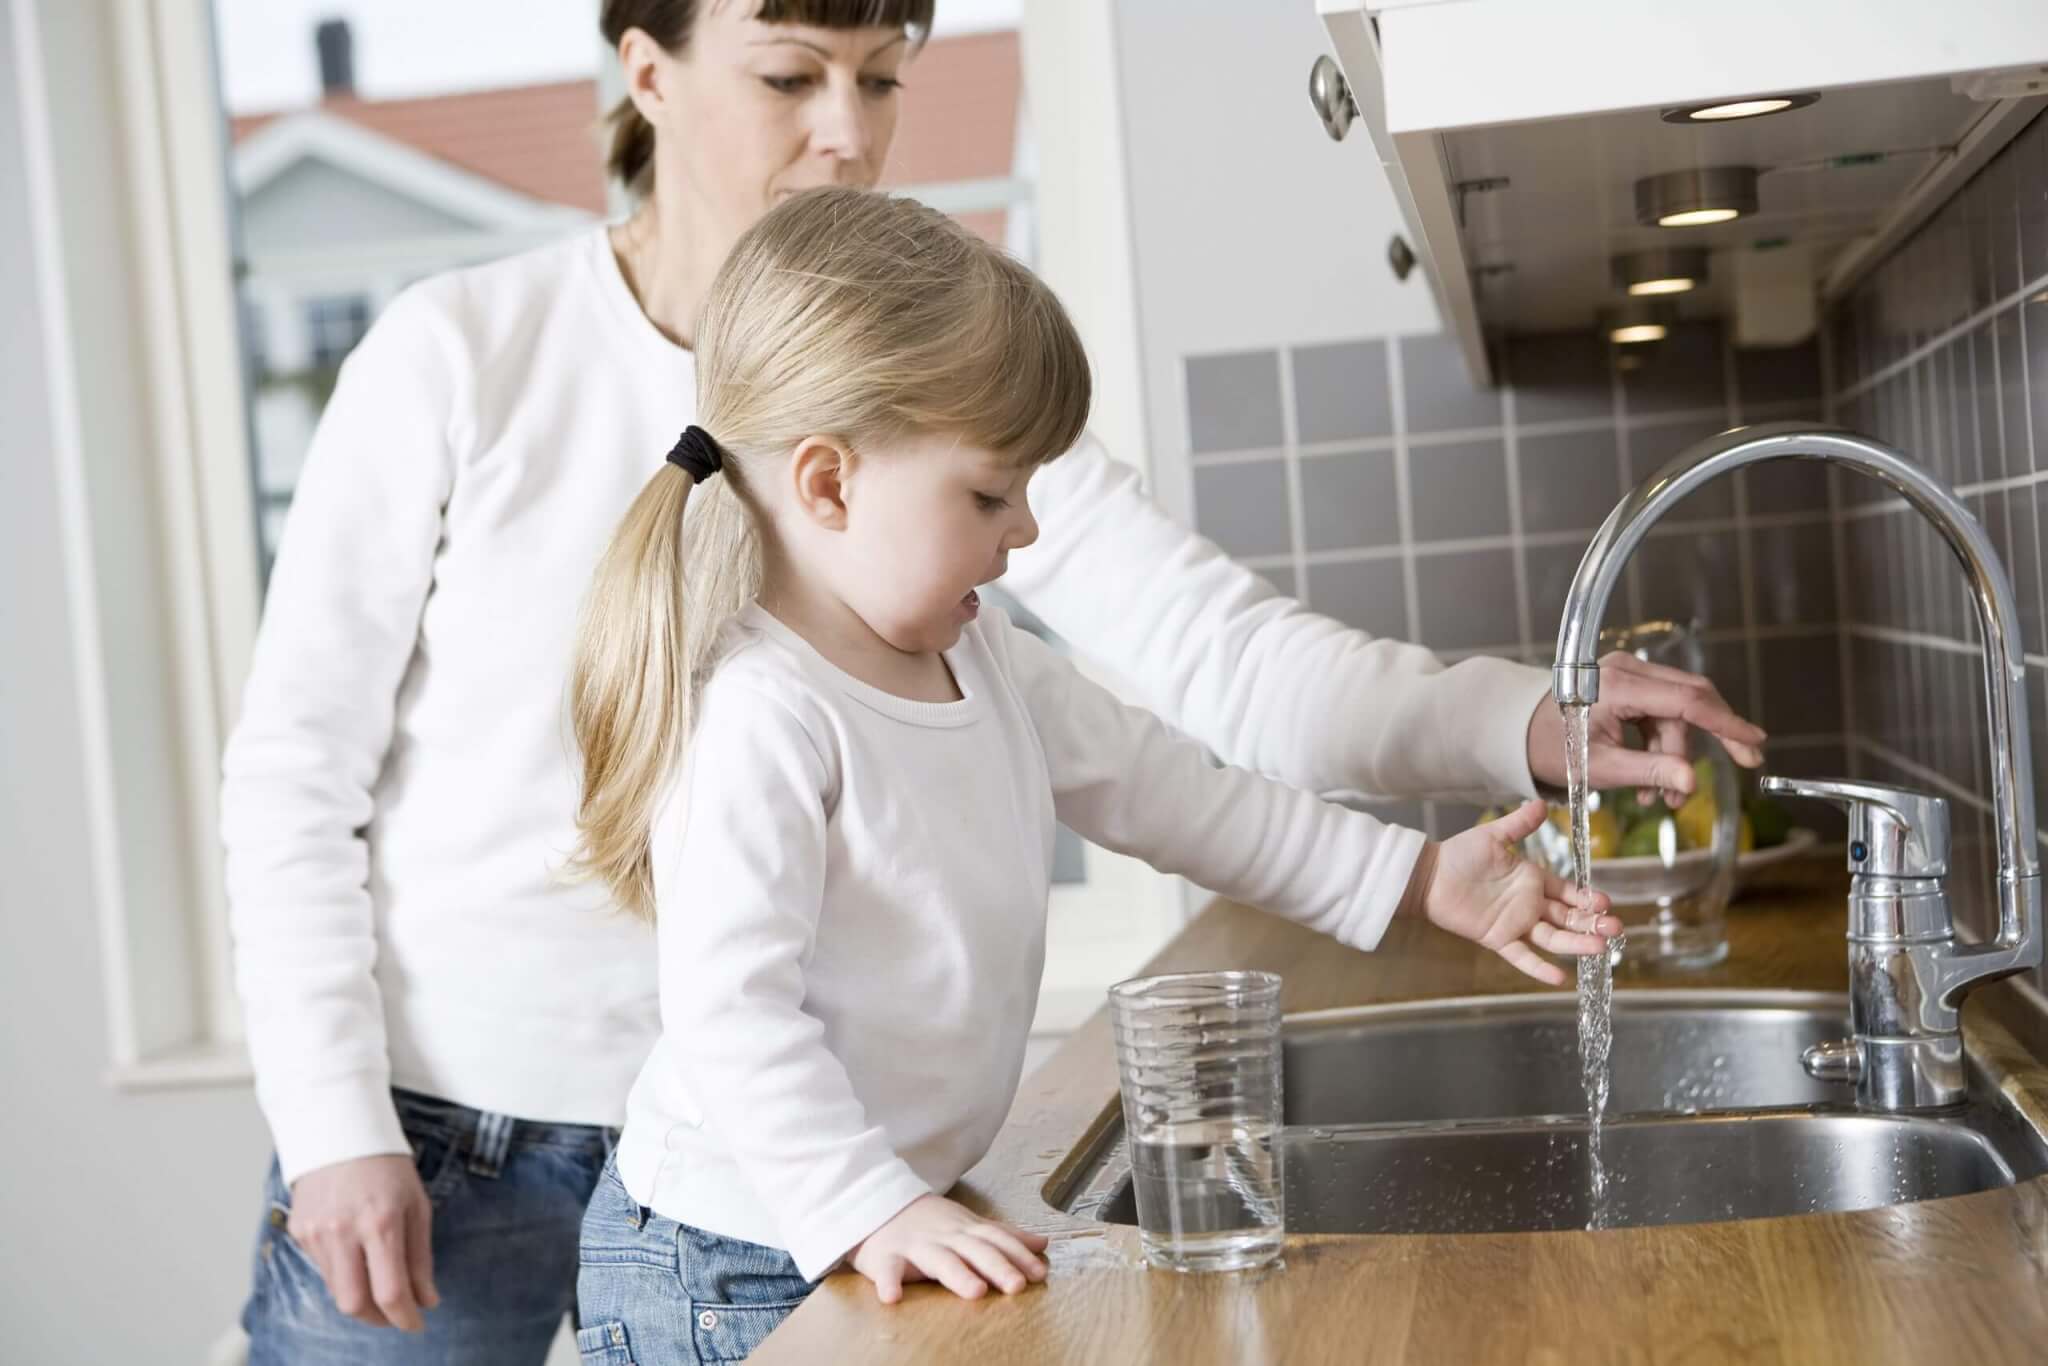 A woman and young girl at a kitchen sink.